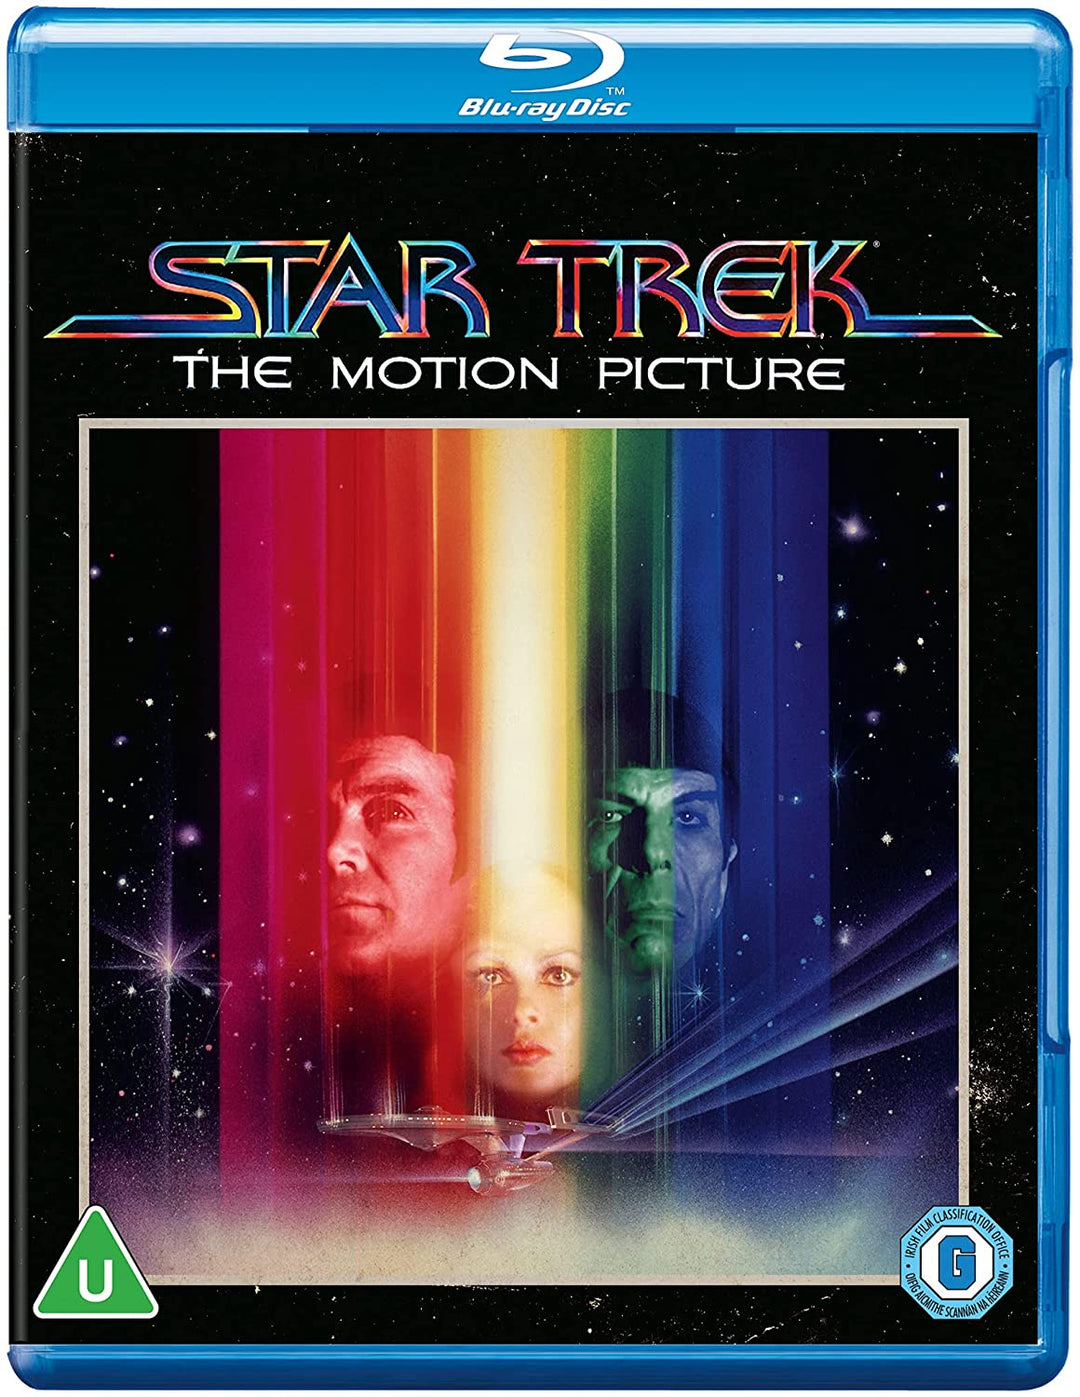 Star Trek: The Motion Picture - Sci-fi [Blu-ray]